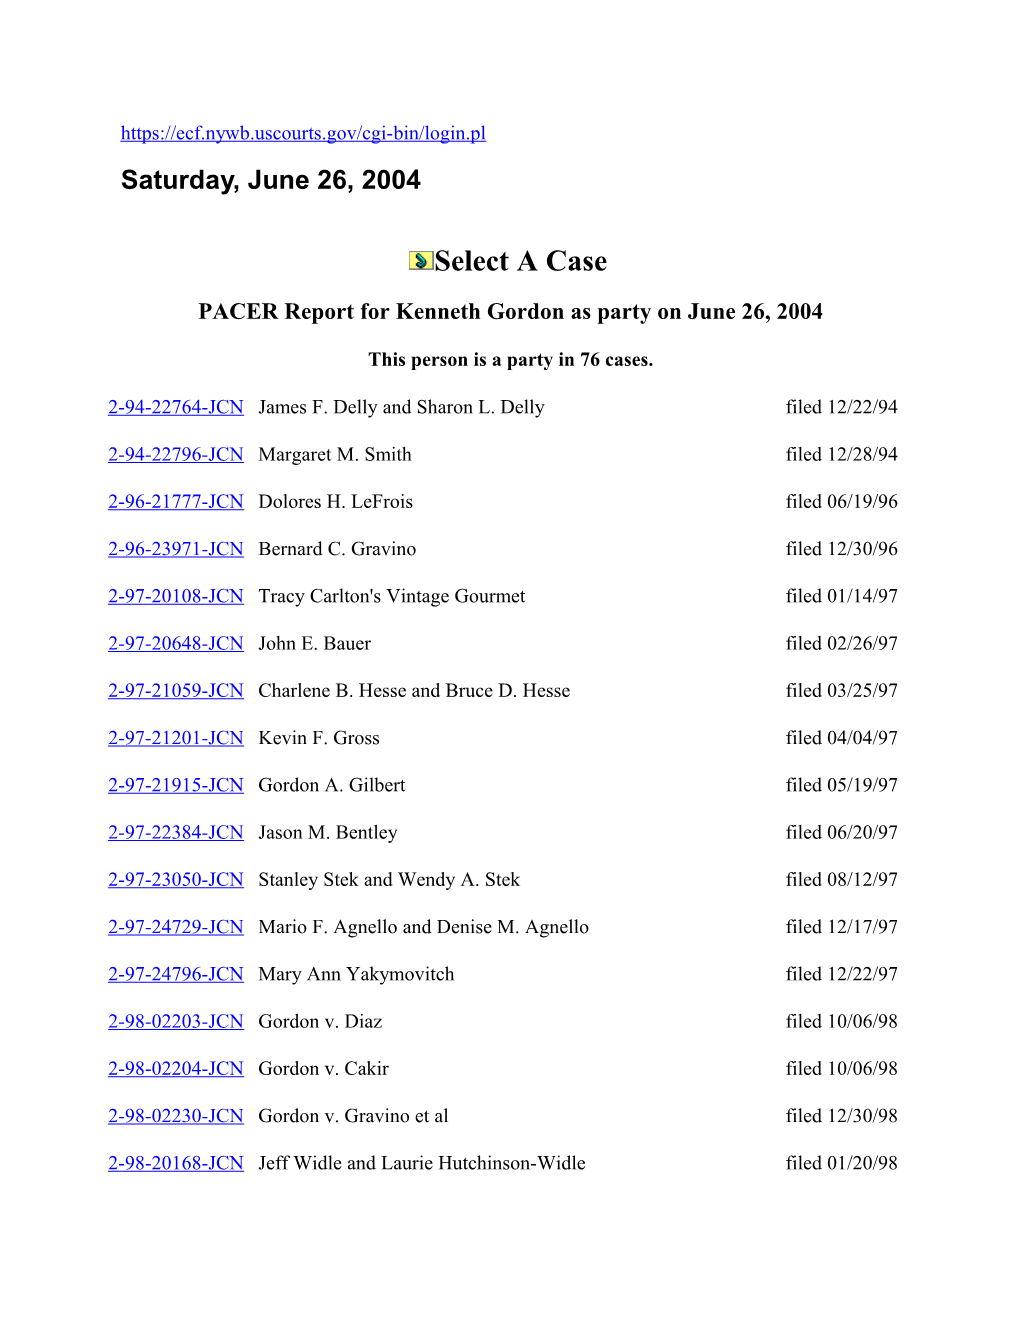 PACER Report for Kenneth Gordon As Party on June 26, 2004